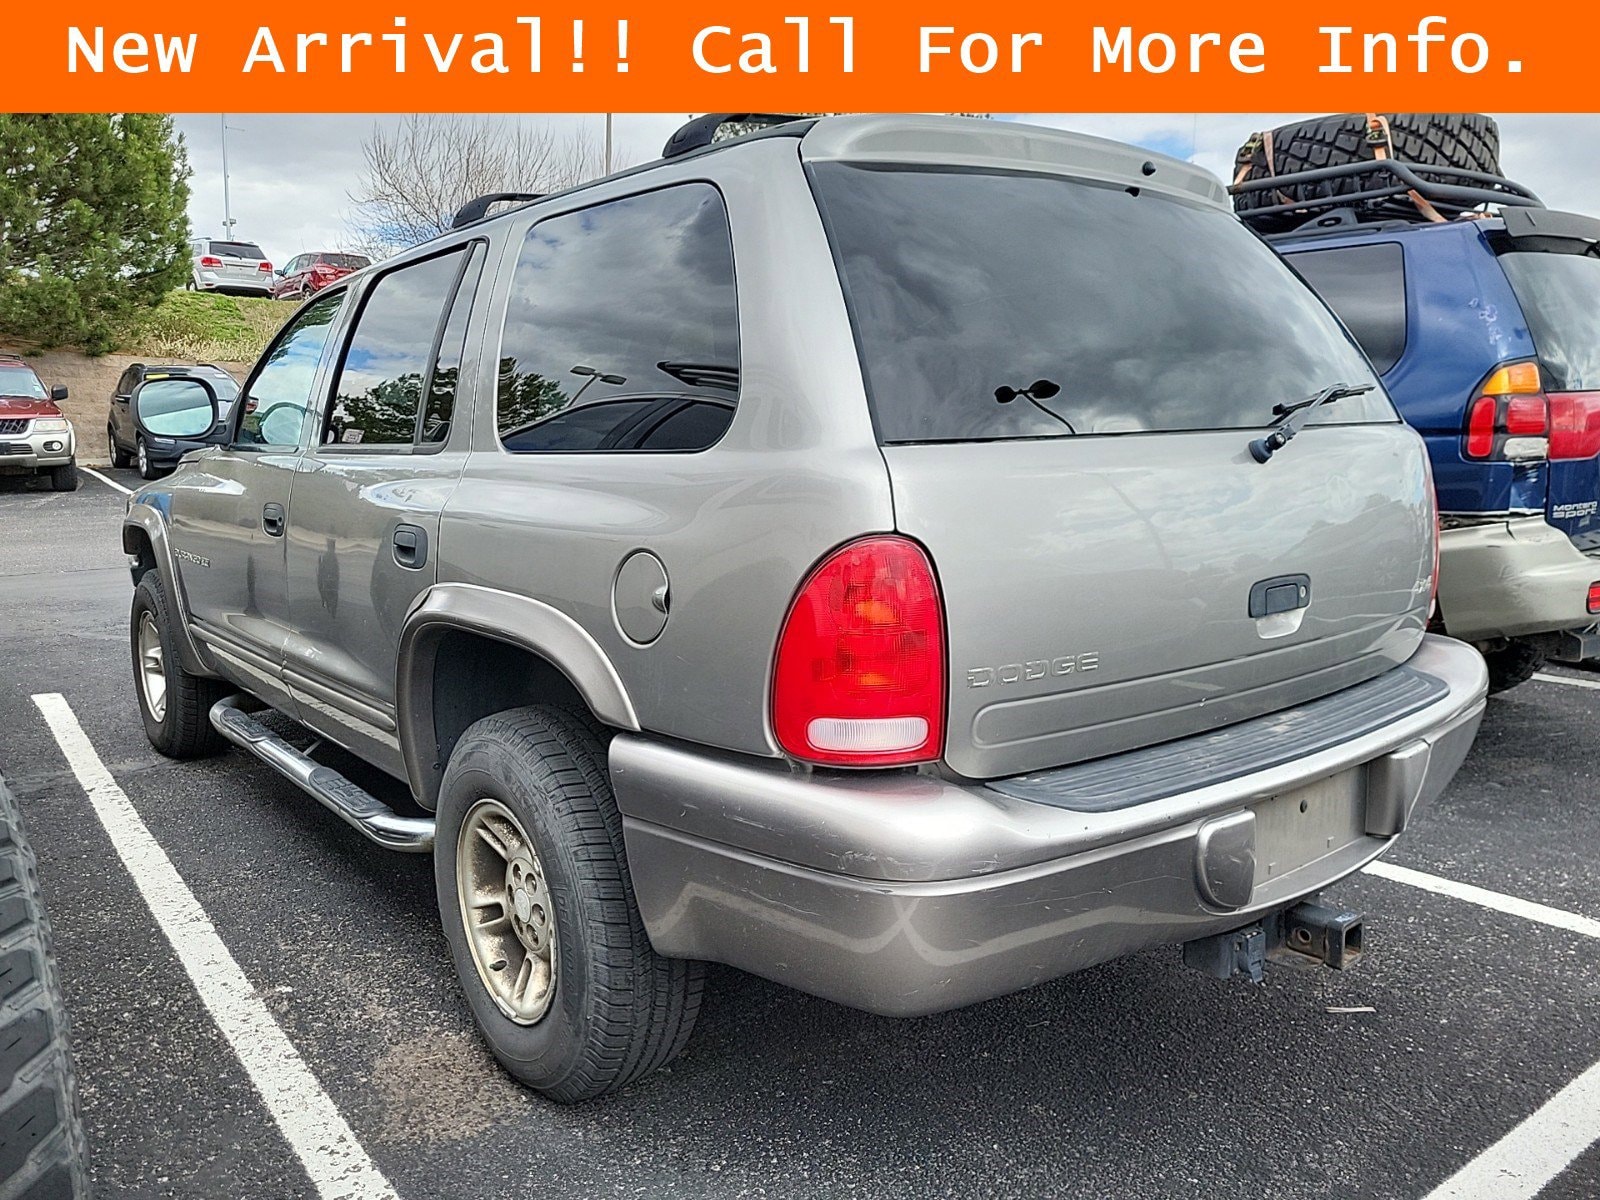 Used 2000 Dodge Durango SLT with VIN 1B4HS28Z2YF190871 for sale in Colorado Springs, CO